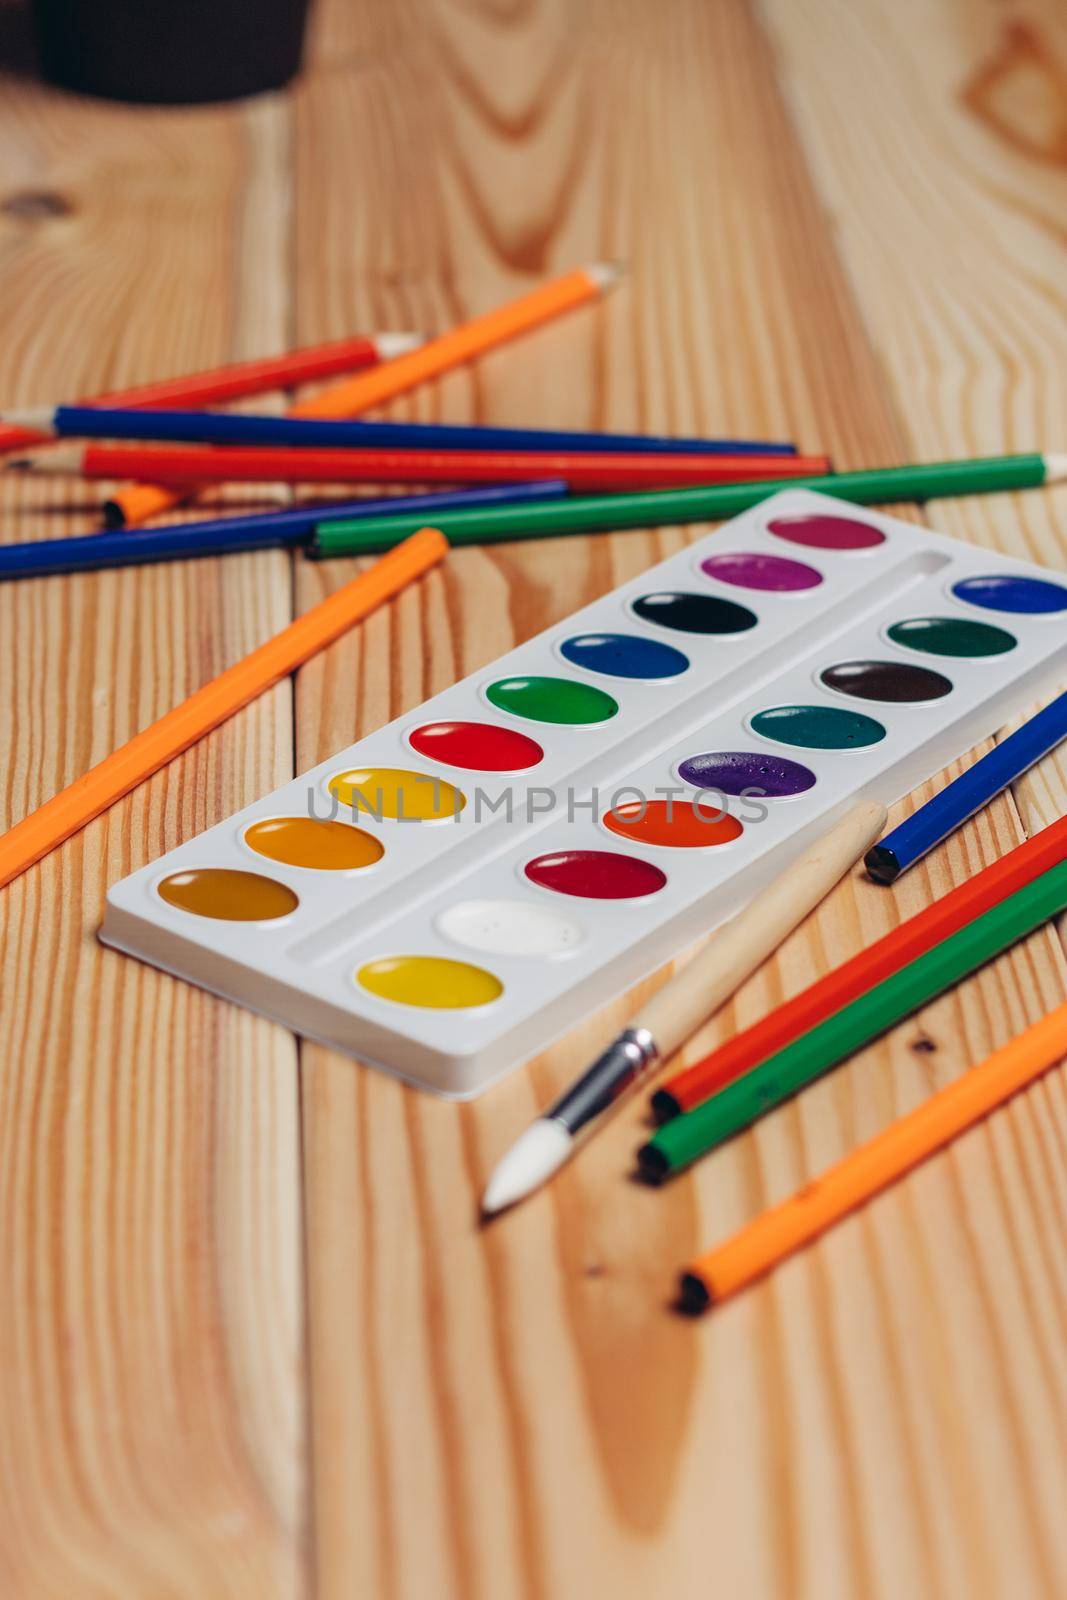 stationery colored pencils paint wooden table art by SHOTPRIME